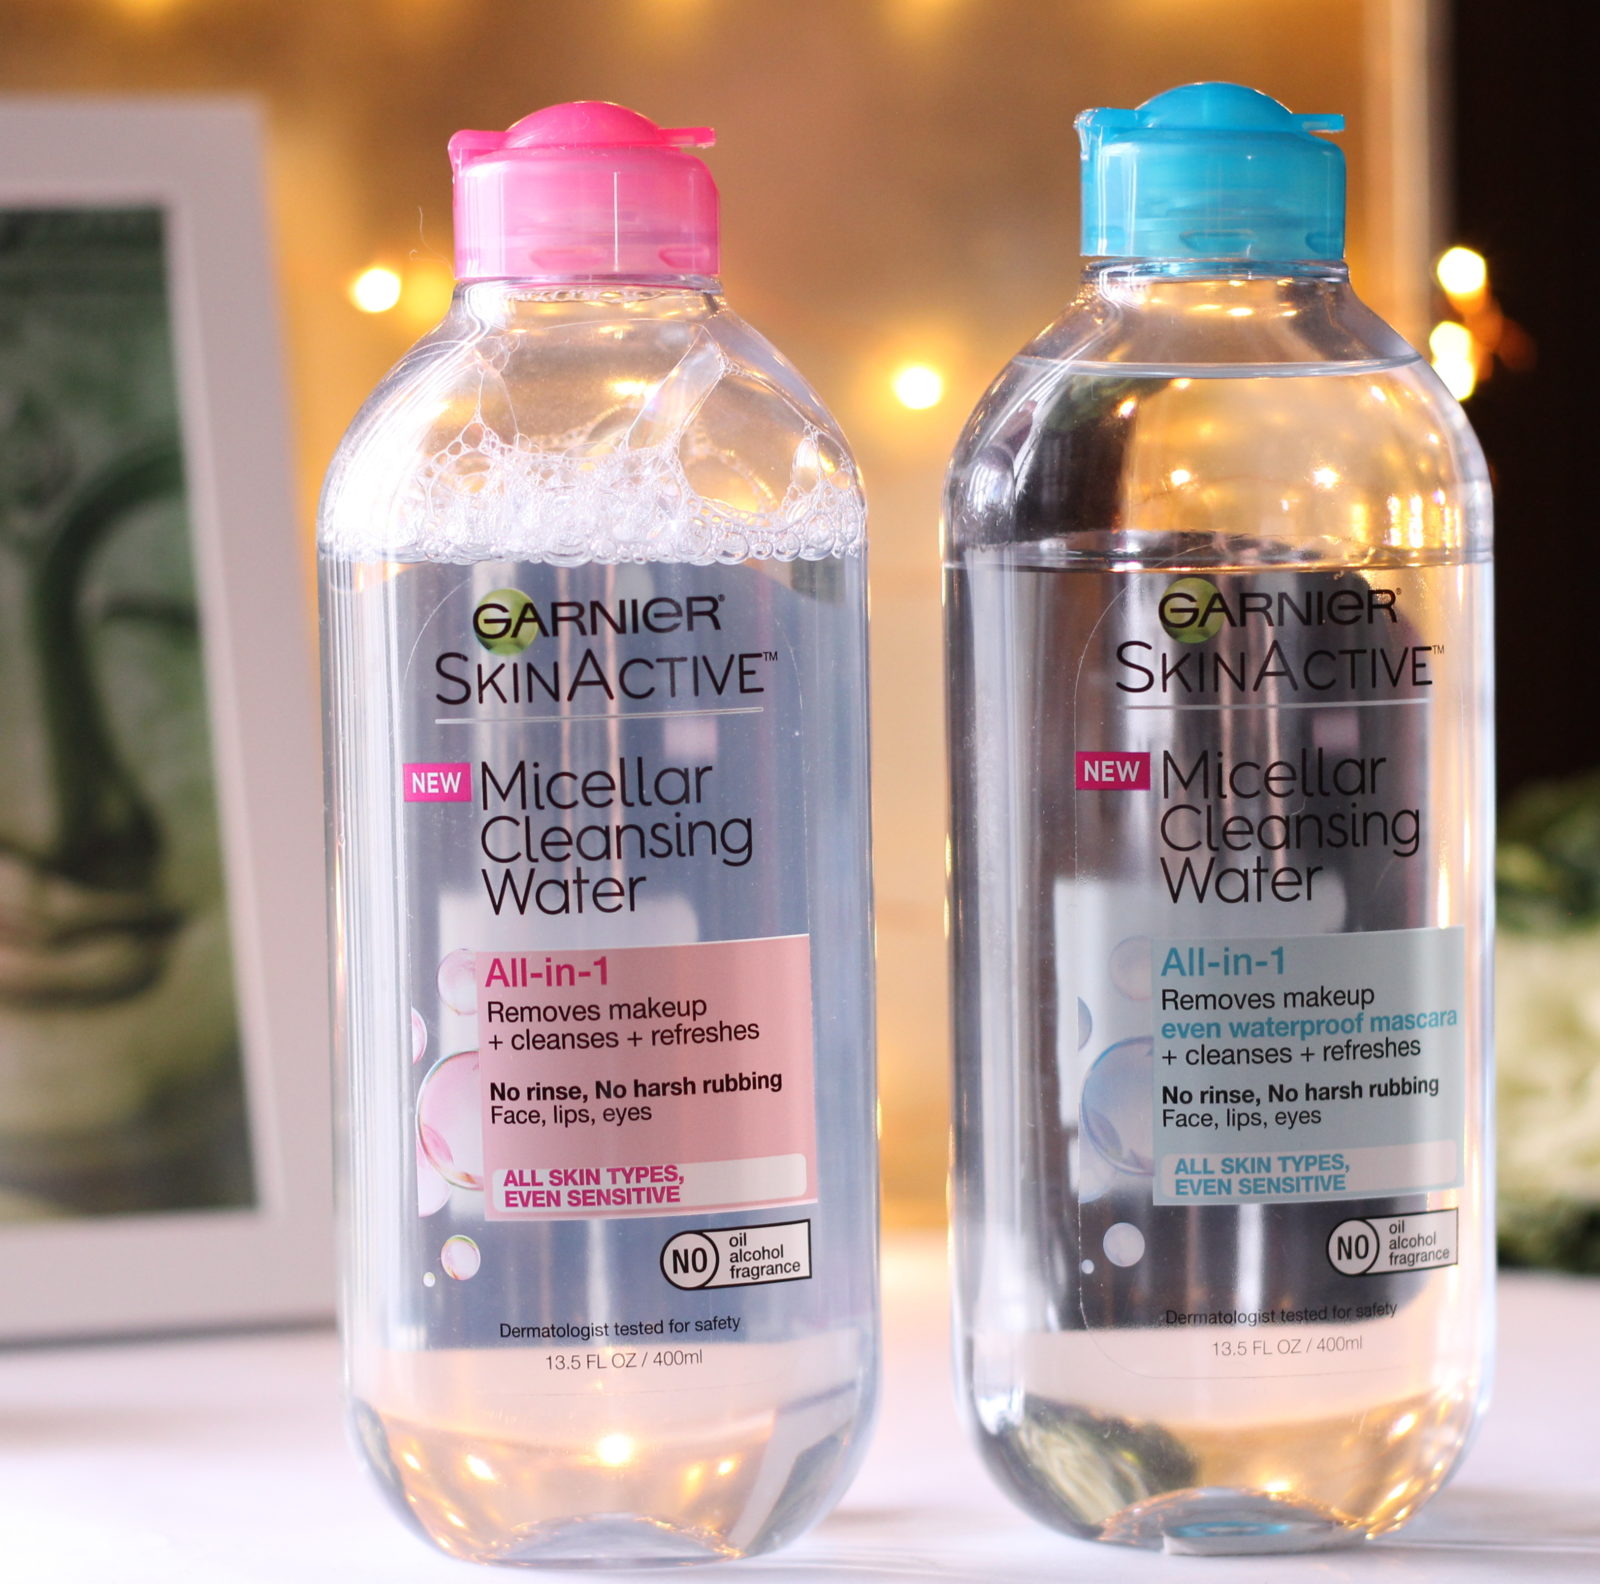 How to use Garnier Micellar Cleansing Water